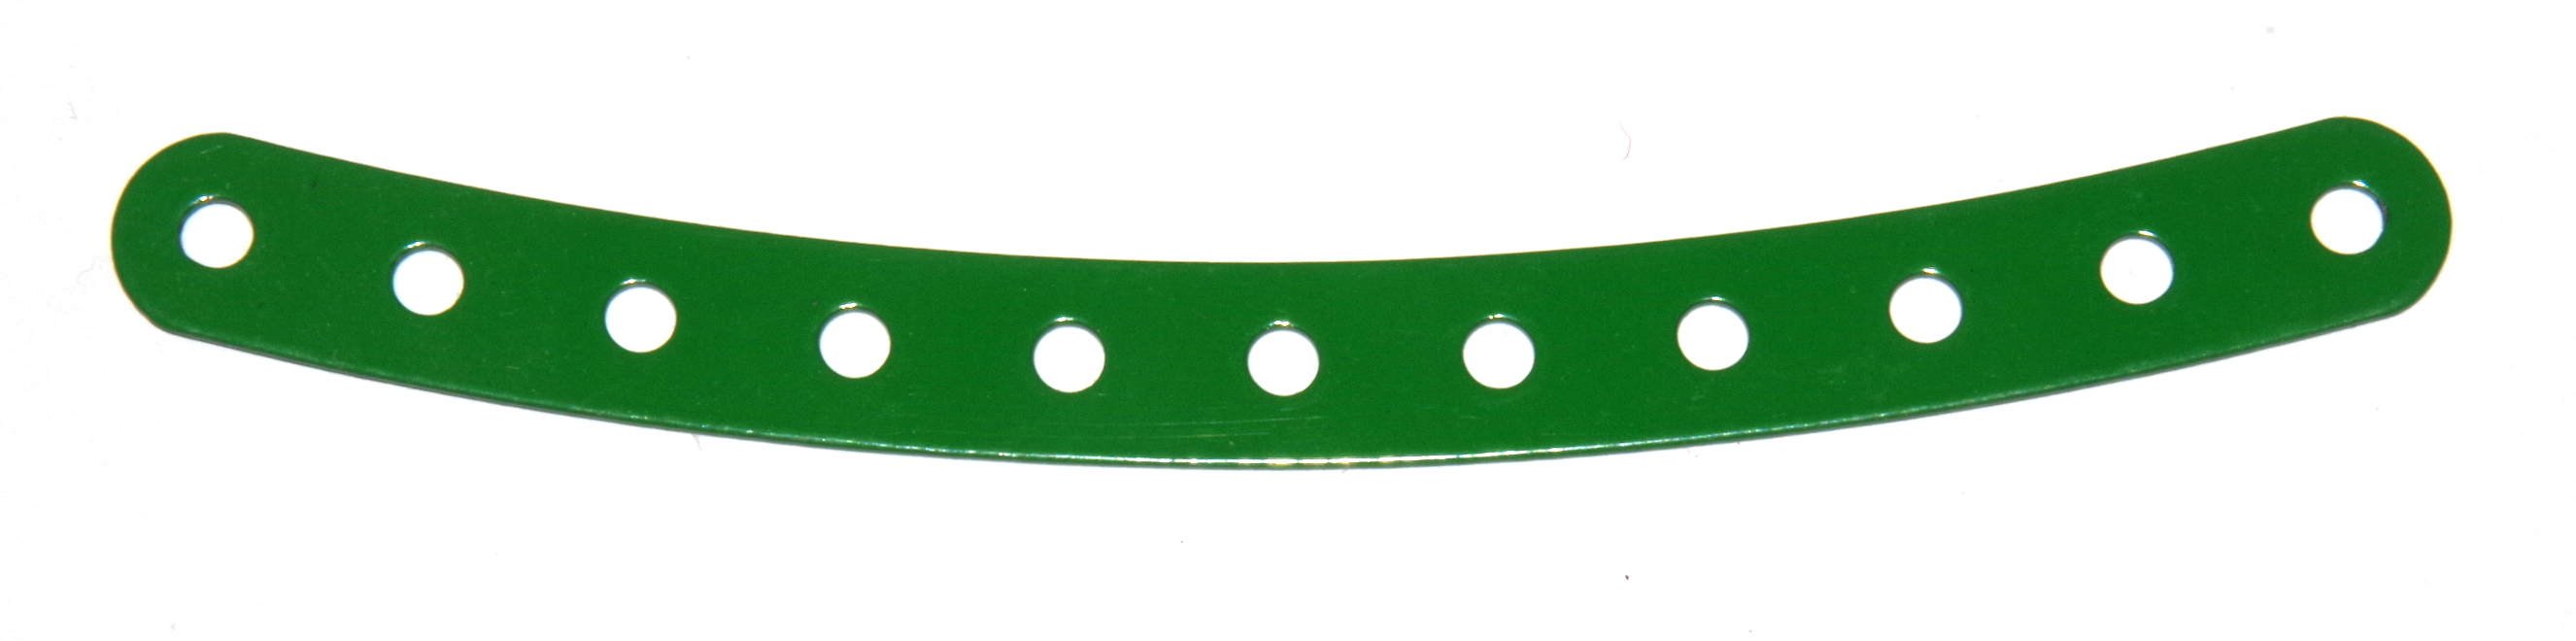 89 Curved Strip 11 Hole Light Green